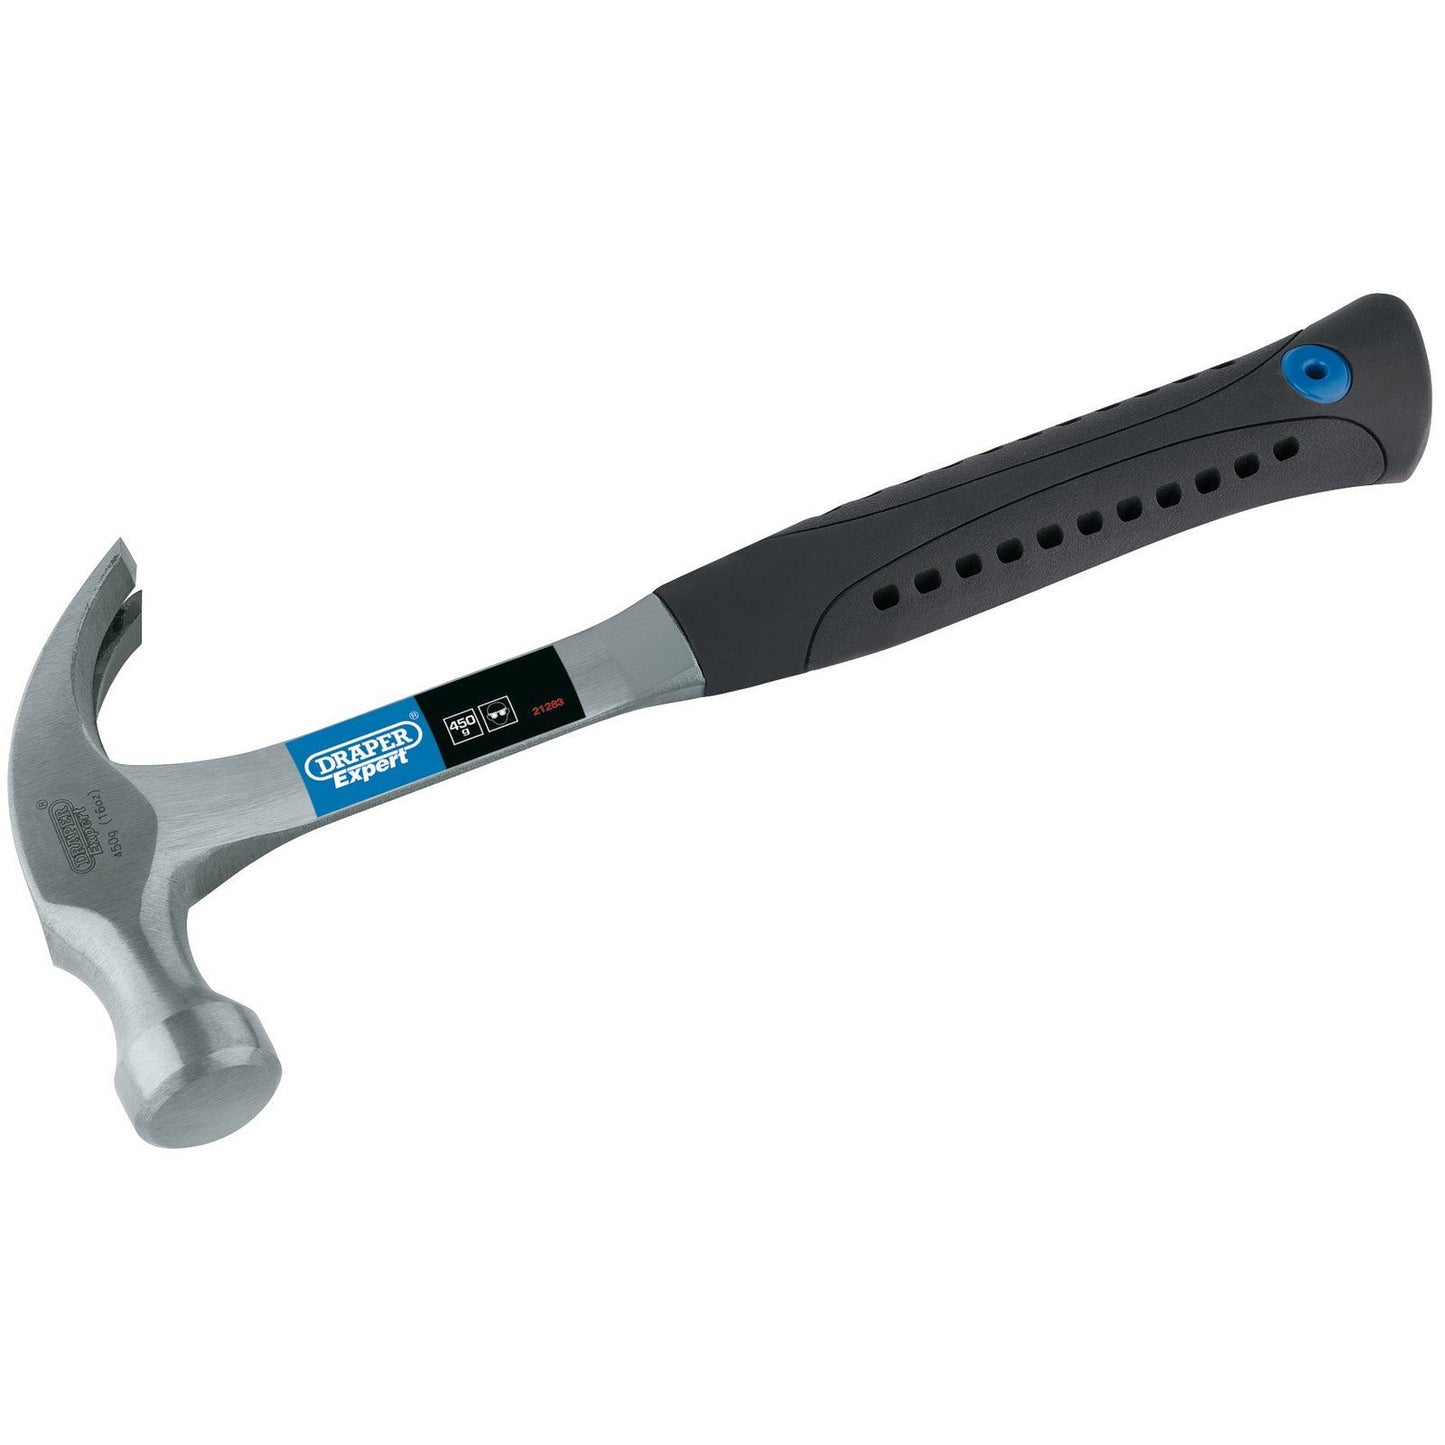 Draper 21283 8988 Expert 450G (16oz) Solid Forged Claw Hammer